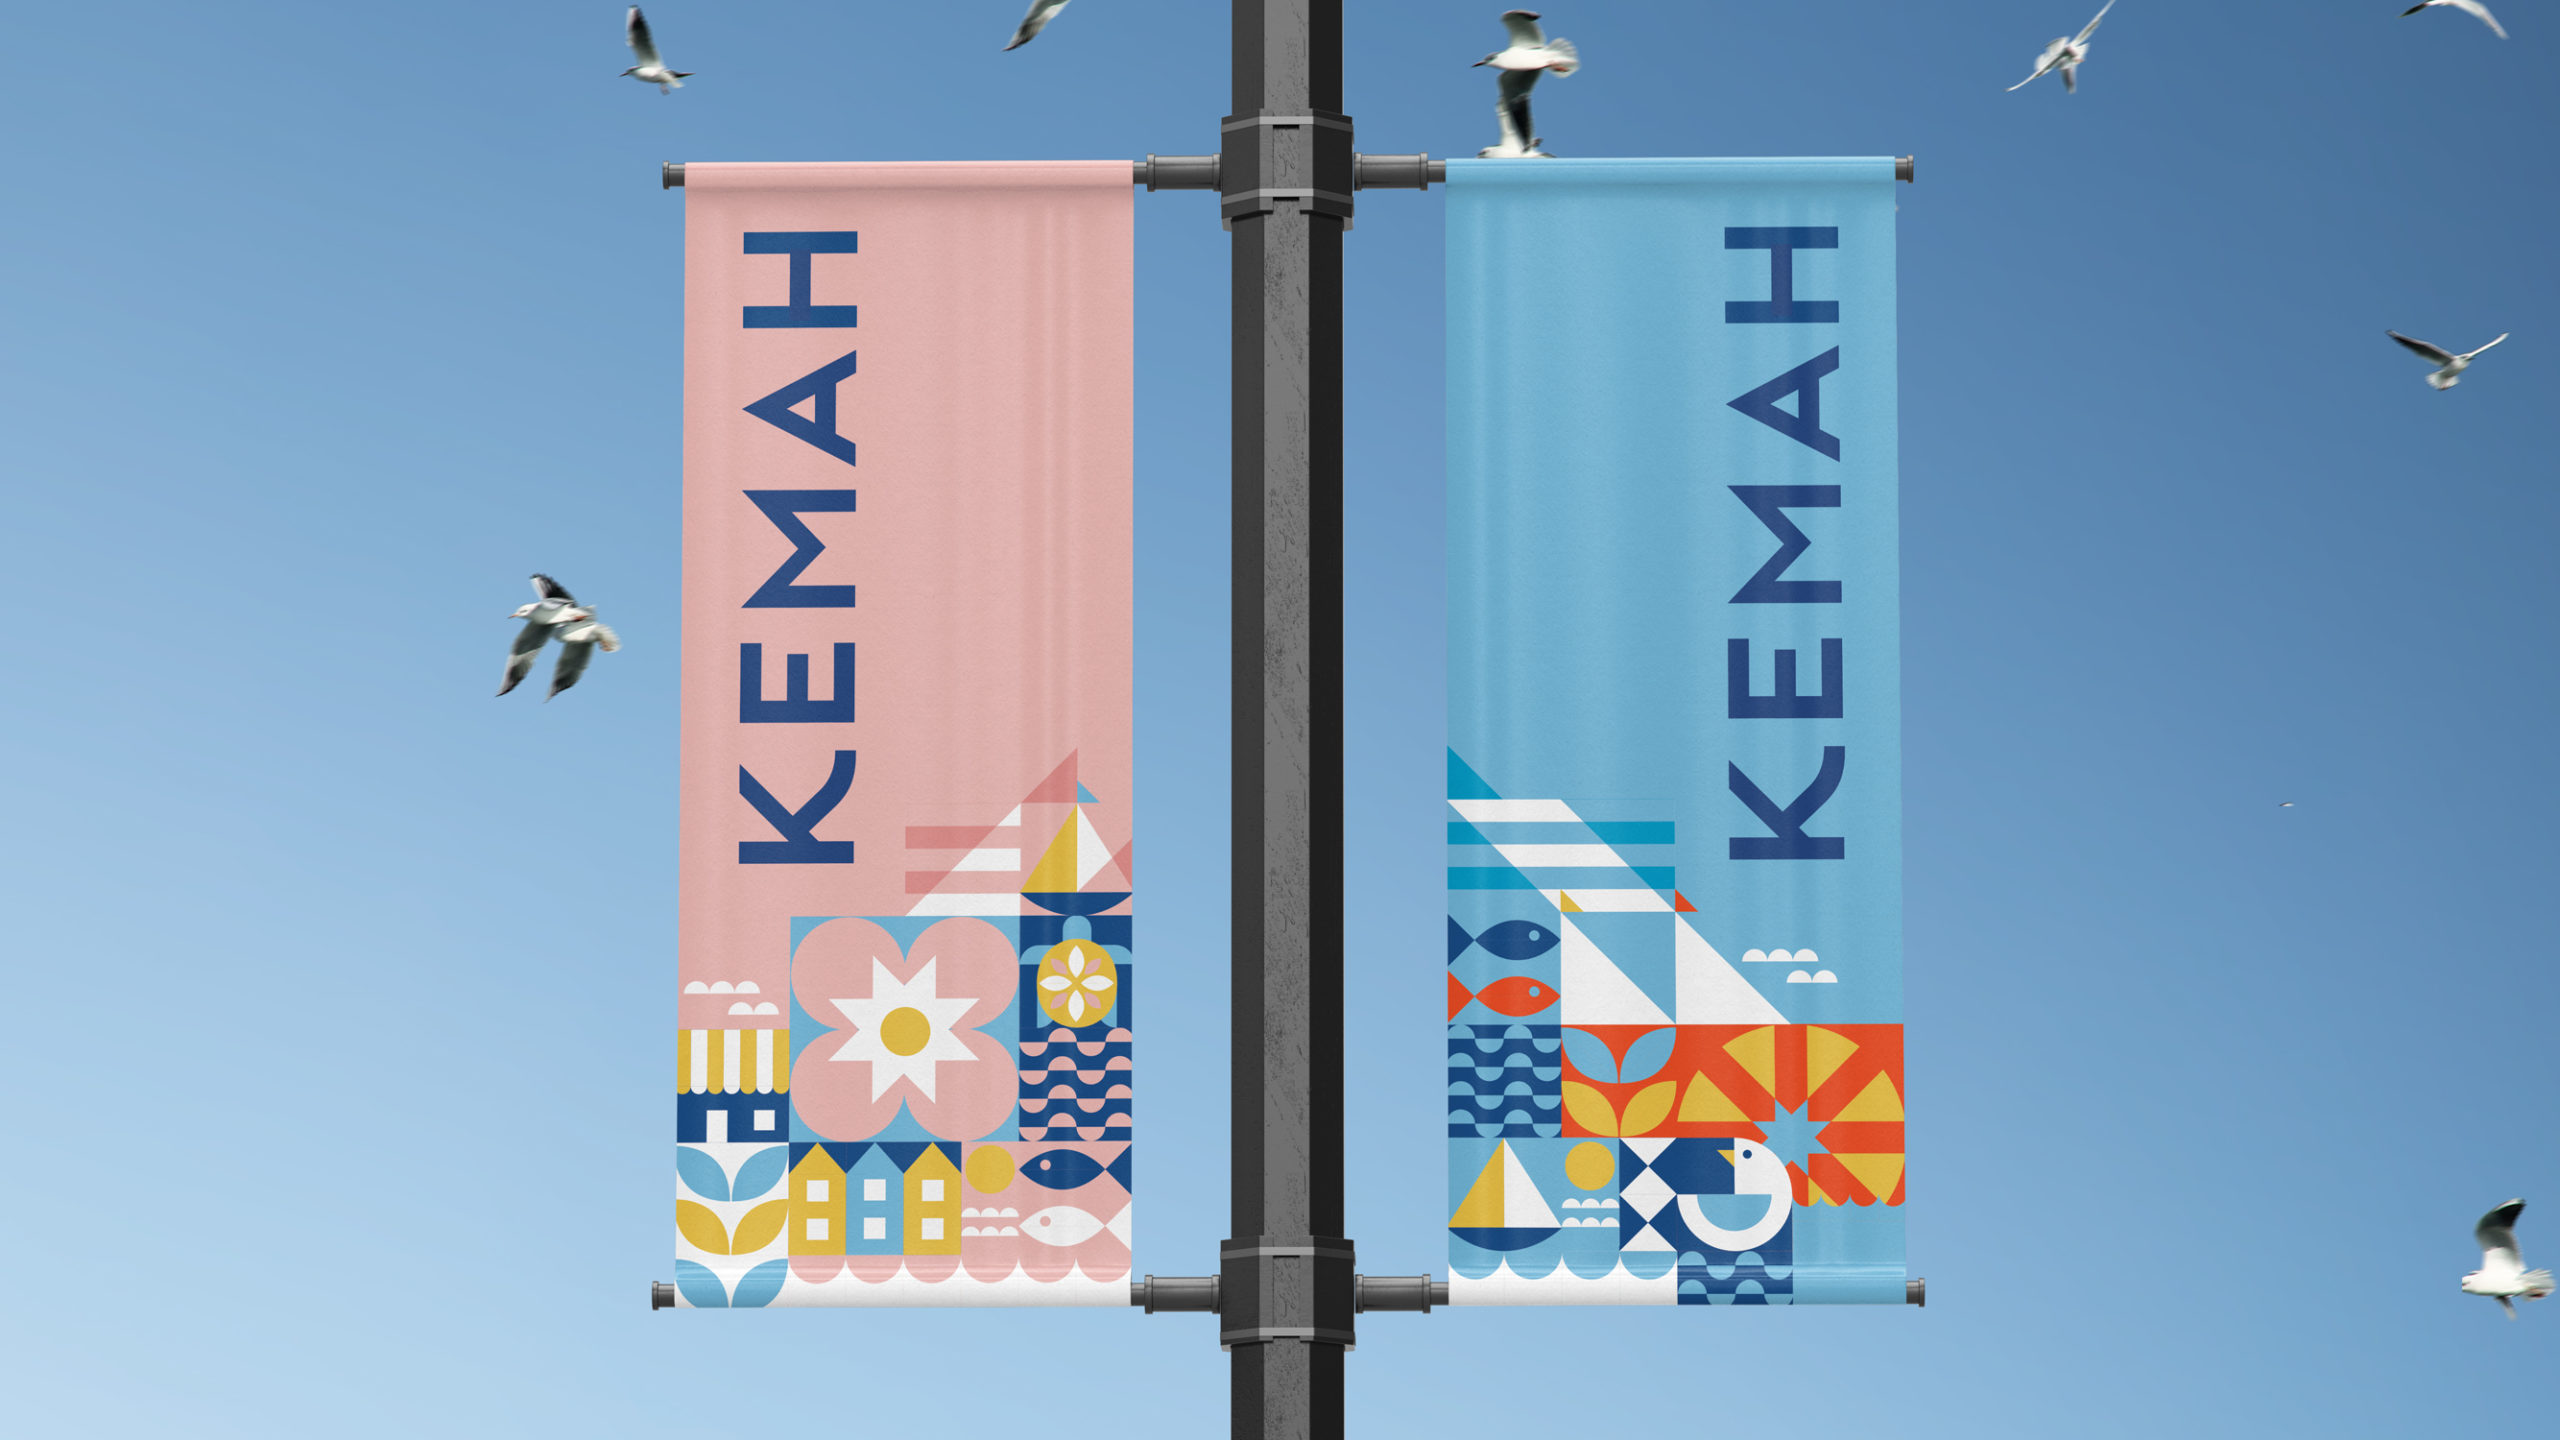 Showing the Kemah TX branding on banners hanging from a streetlight. Branding designed by MDR. Kemah is a small coastal town just outside of Houston.